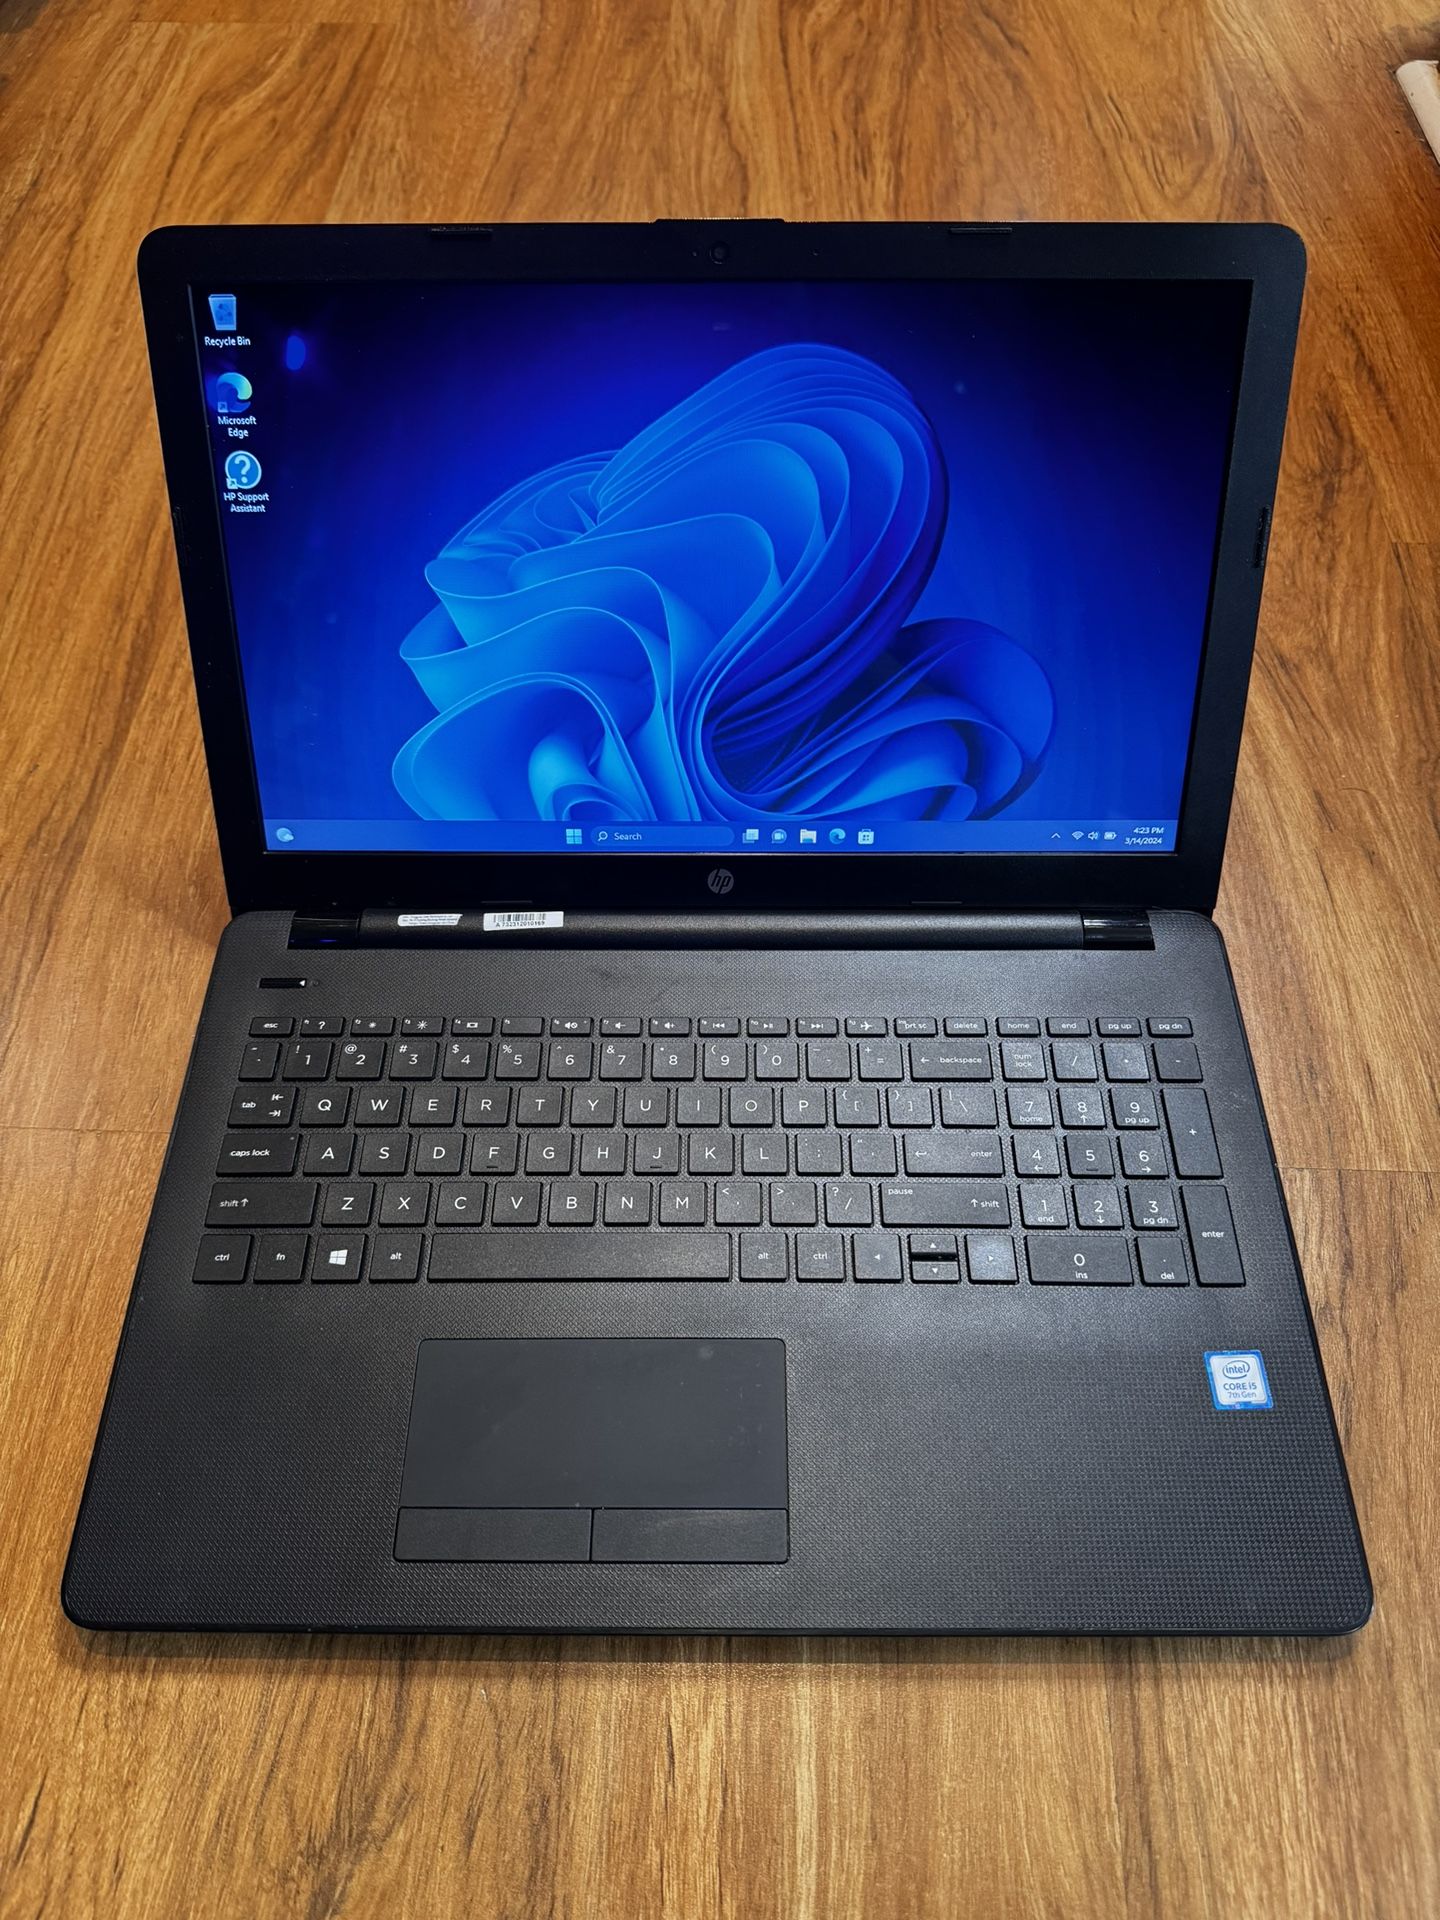 HP 15 Touch Screen NoteBook core i5 7th gen 8GB Ram 256GB SSD Windows 11 Pro 15.6” Touch Screen Laptop with charger in Excellent Working condition!!!!